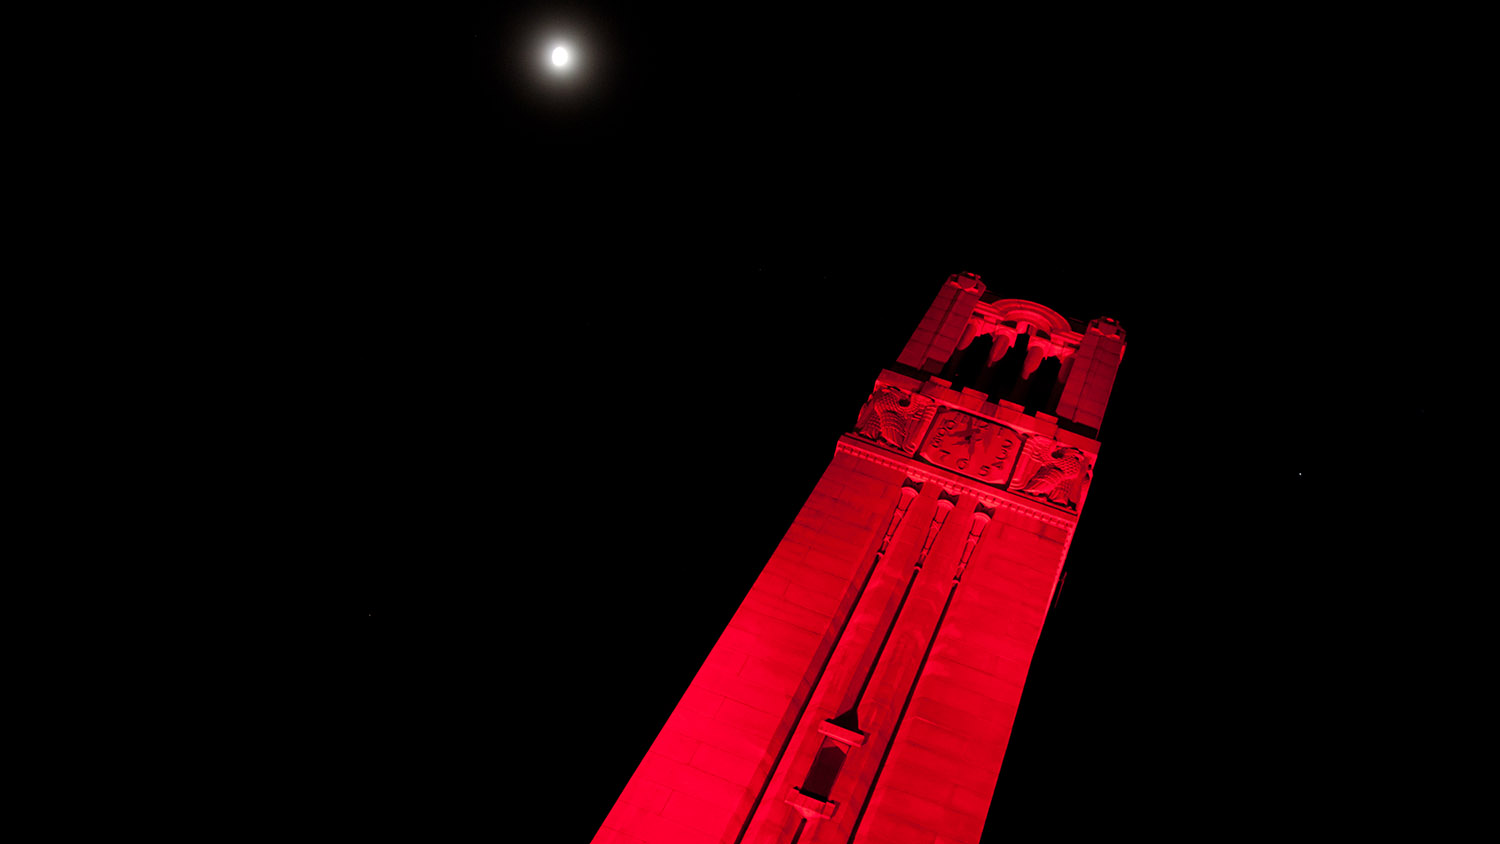 Bell Tower up lit red.